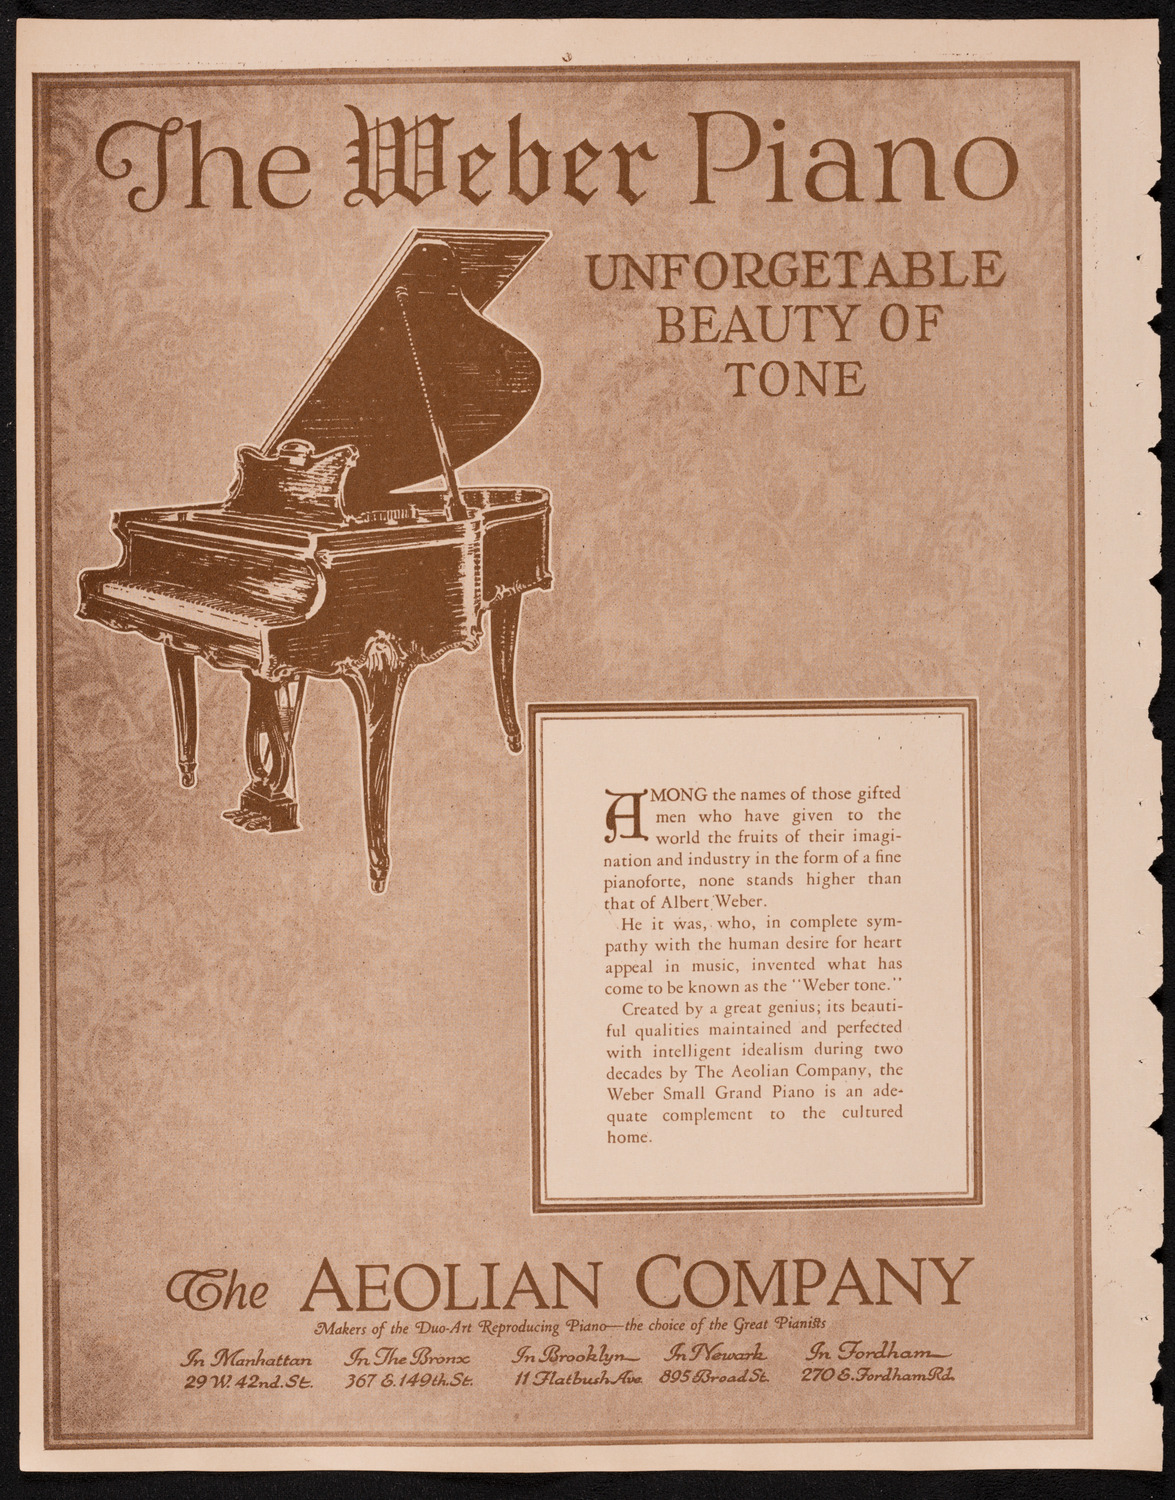 Concert presented by the Jewish National Workers' Alliance, New York City Committee, February 7, 1925, program page 2